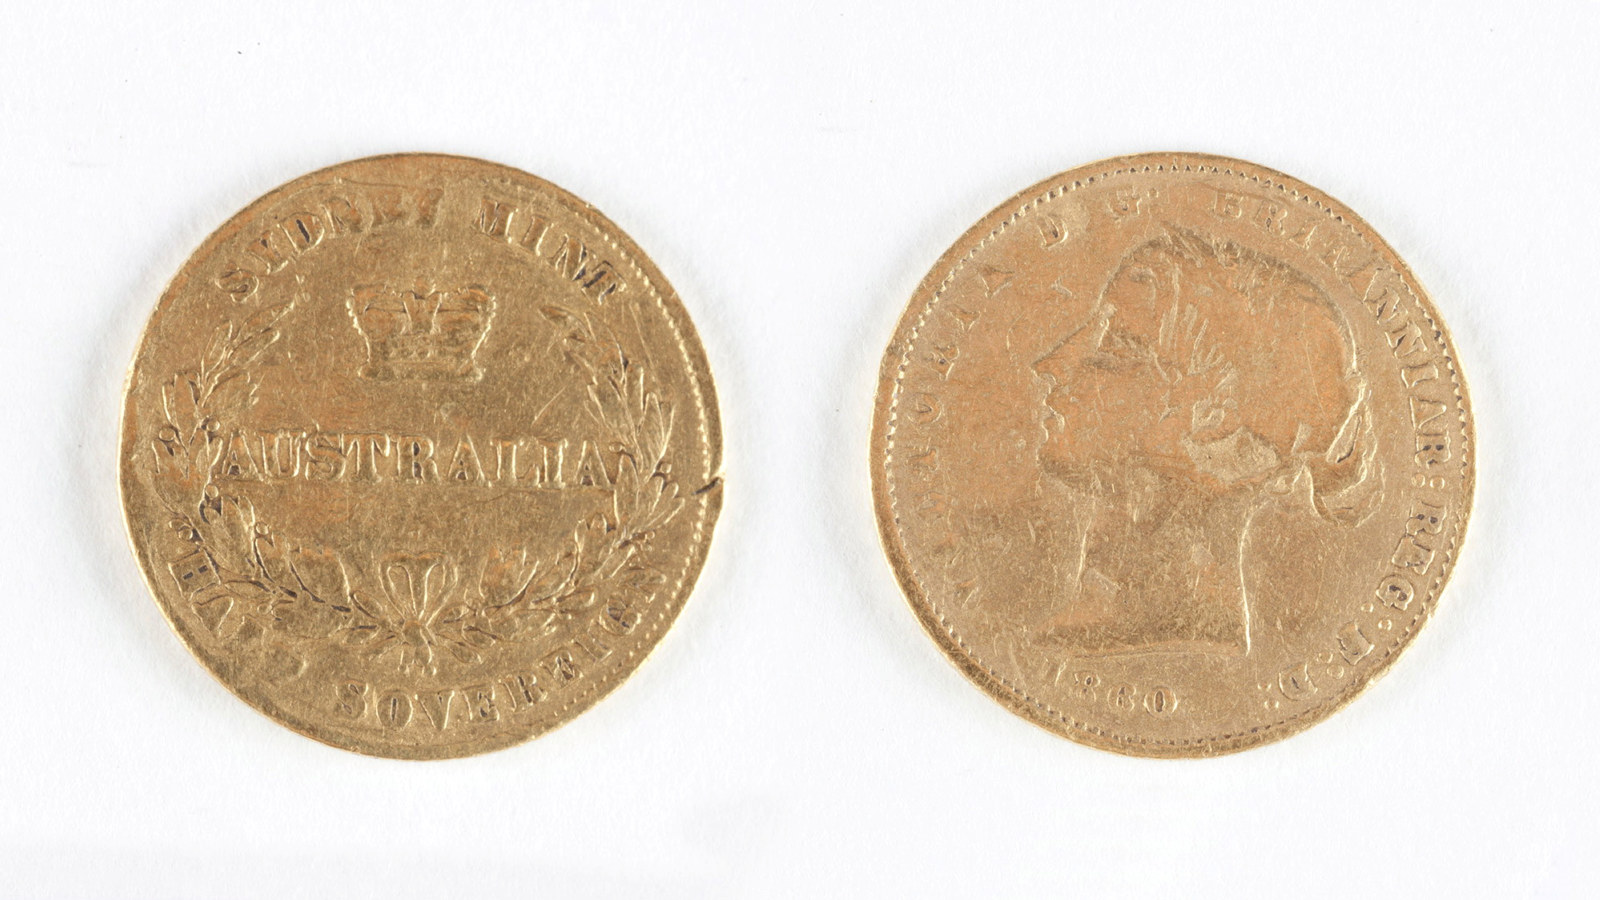 Front and back of gold coin, showing details of inscription. Embossed text obverse side of coin; â€˜VICTORIA D:G: BRITANNIAR: REGINA F:D: 1860â€™. Embossed text reverse of coin; 'SYDNEY MINT / AUSTRALIA / HALF SOVEREIGN'.